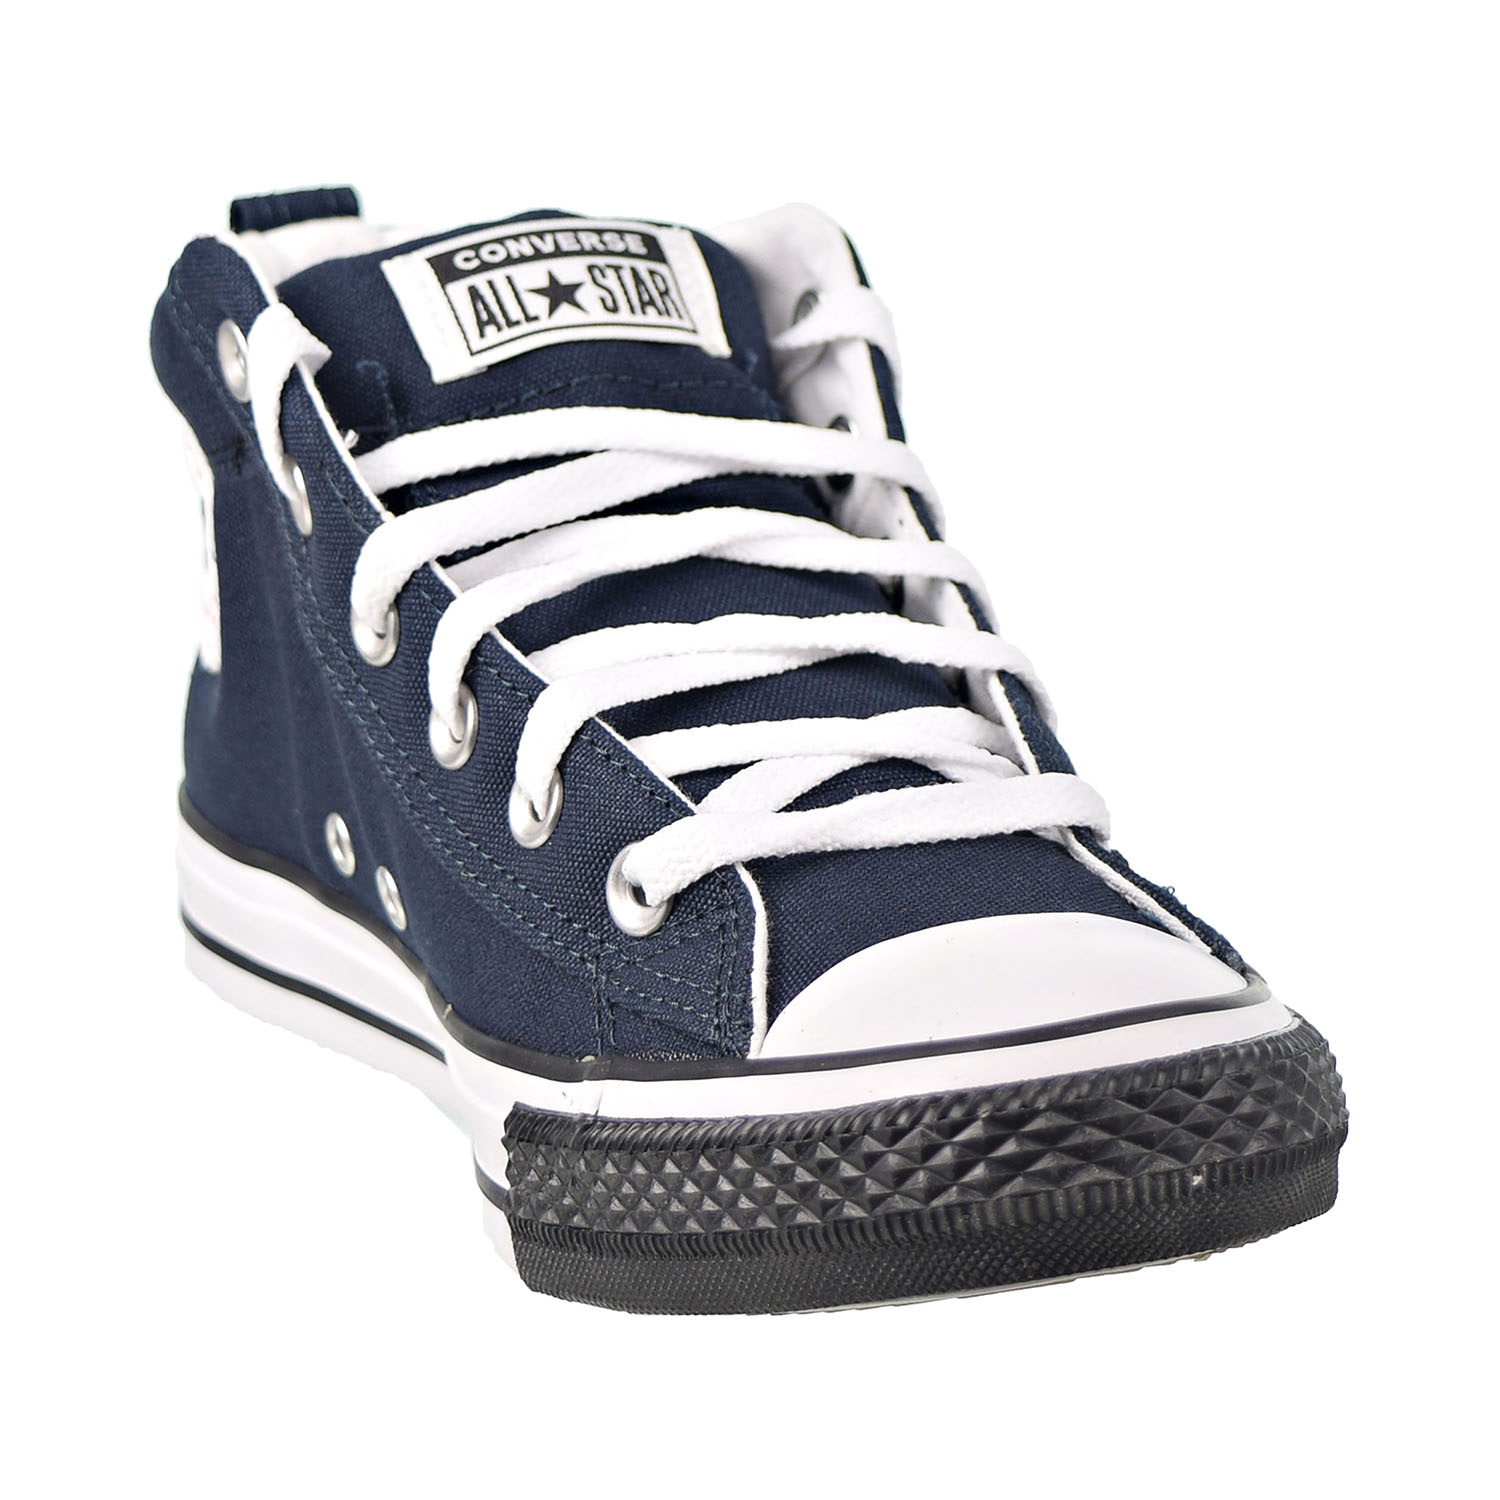 Converse Chuck Taylor All Star Street Mid Men's Shoes Dark Obsidian-White-Black 166337f - image 2 of 6